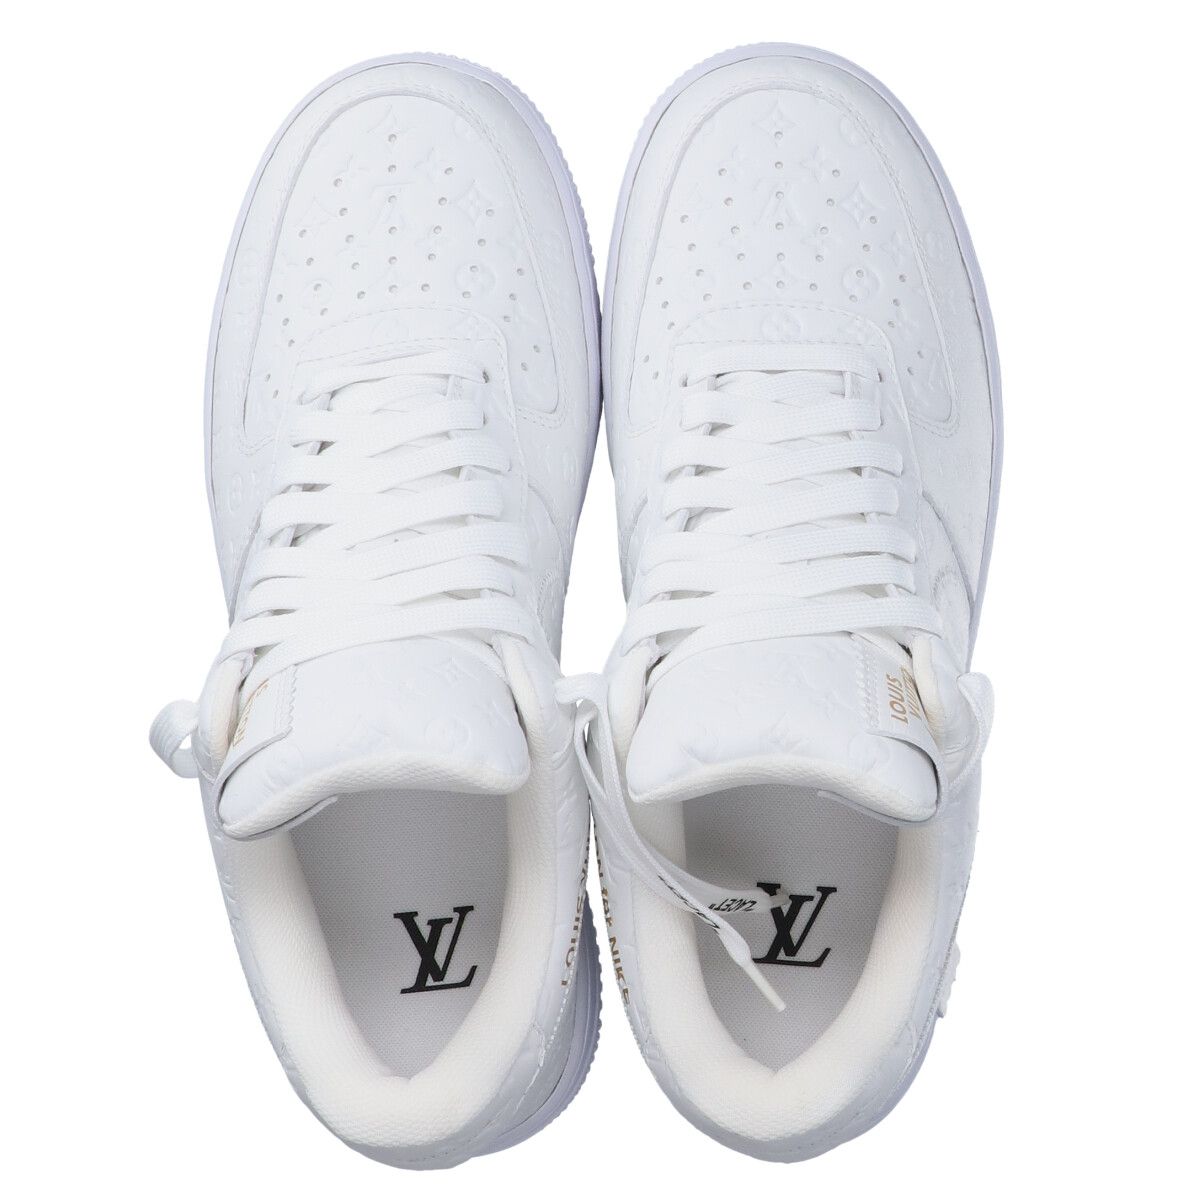 LOUIS VUITTON ルイ ヴィトン ×ナイキ モノグラム Air Force 1 Low